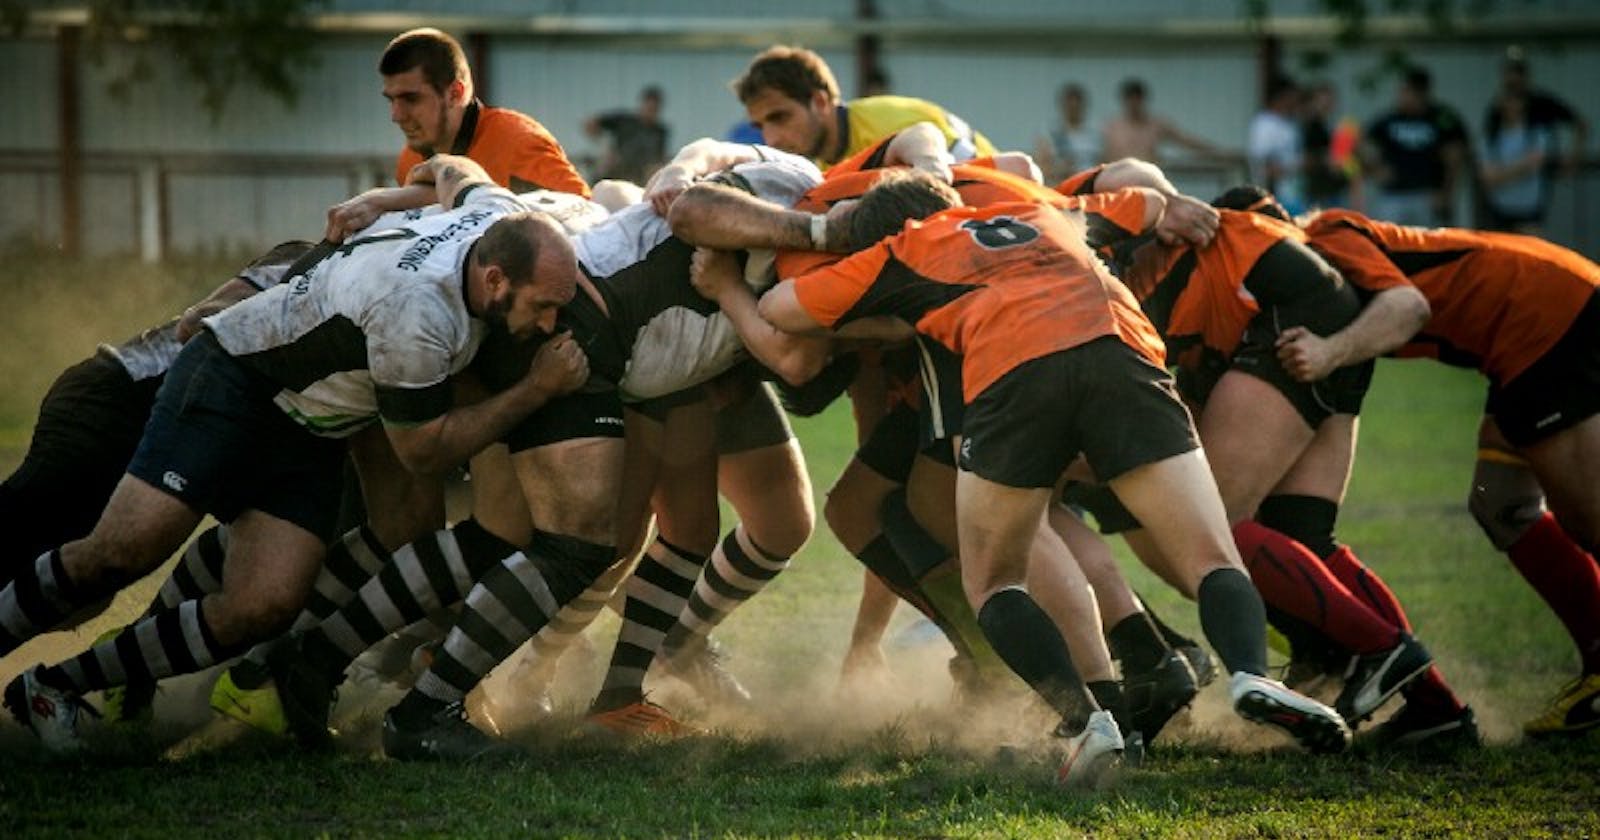 The Newbies Guide to Scrum